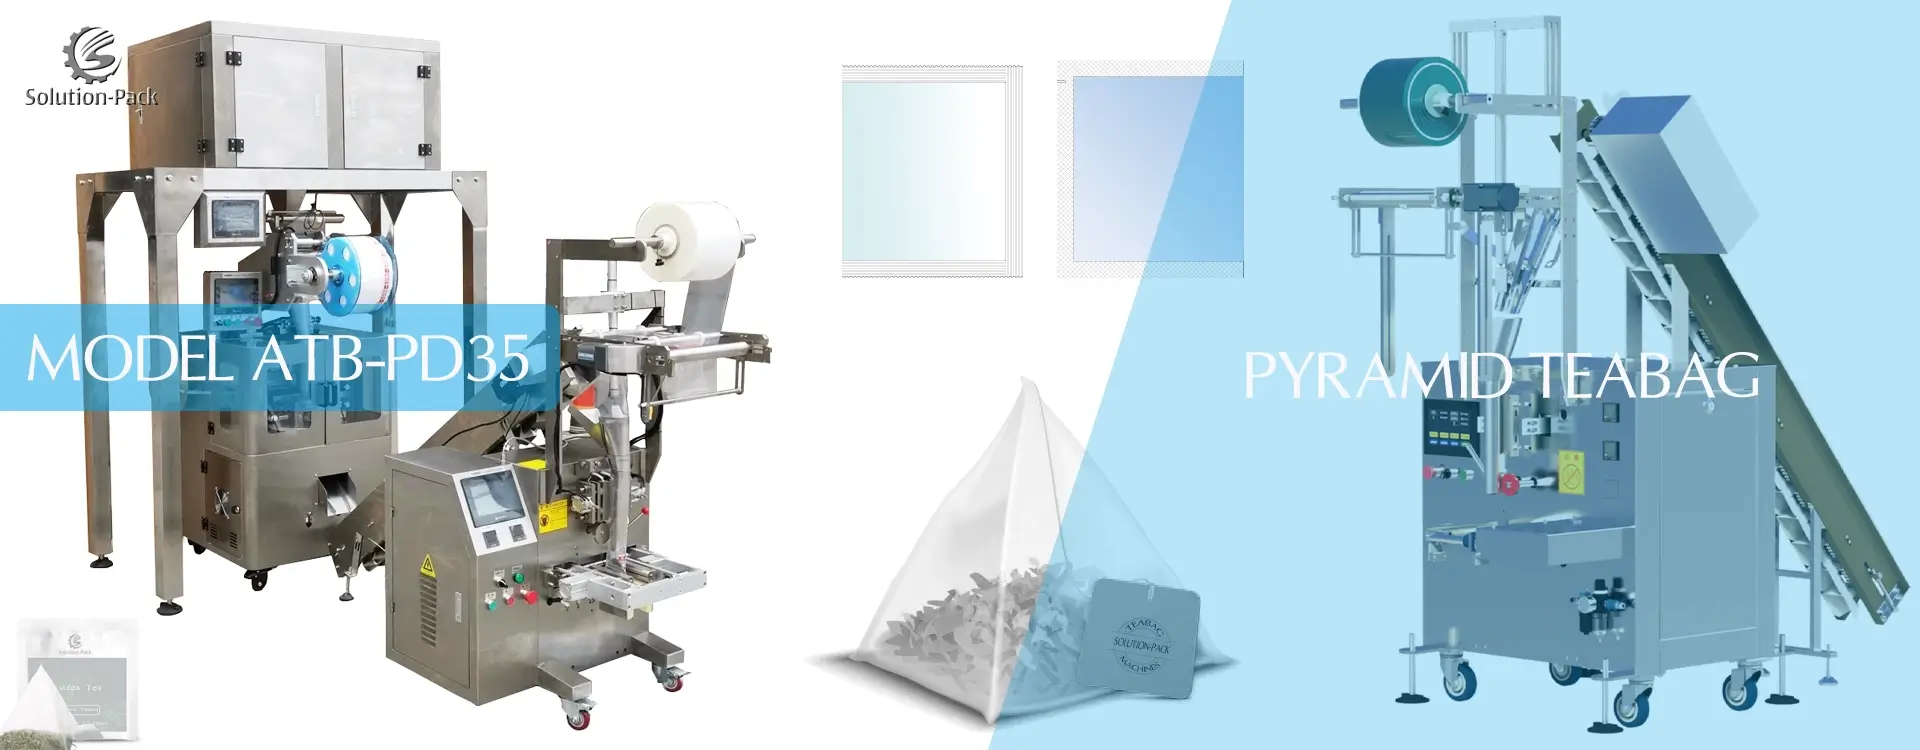 Model ATB-PD35 Pyramid Teabag Packaging Machine | Solution-Pack